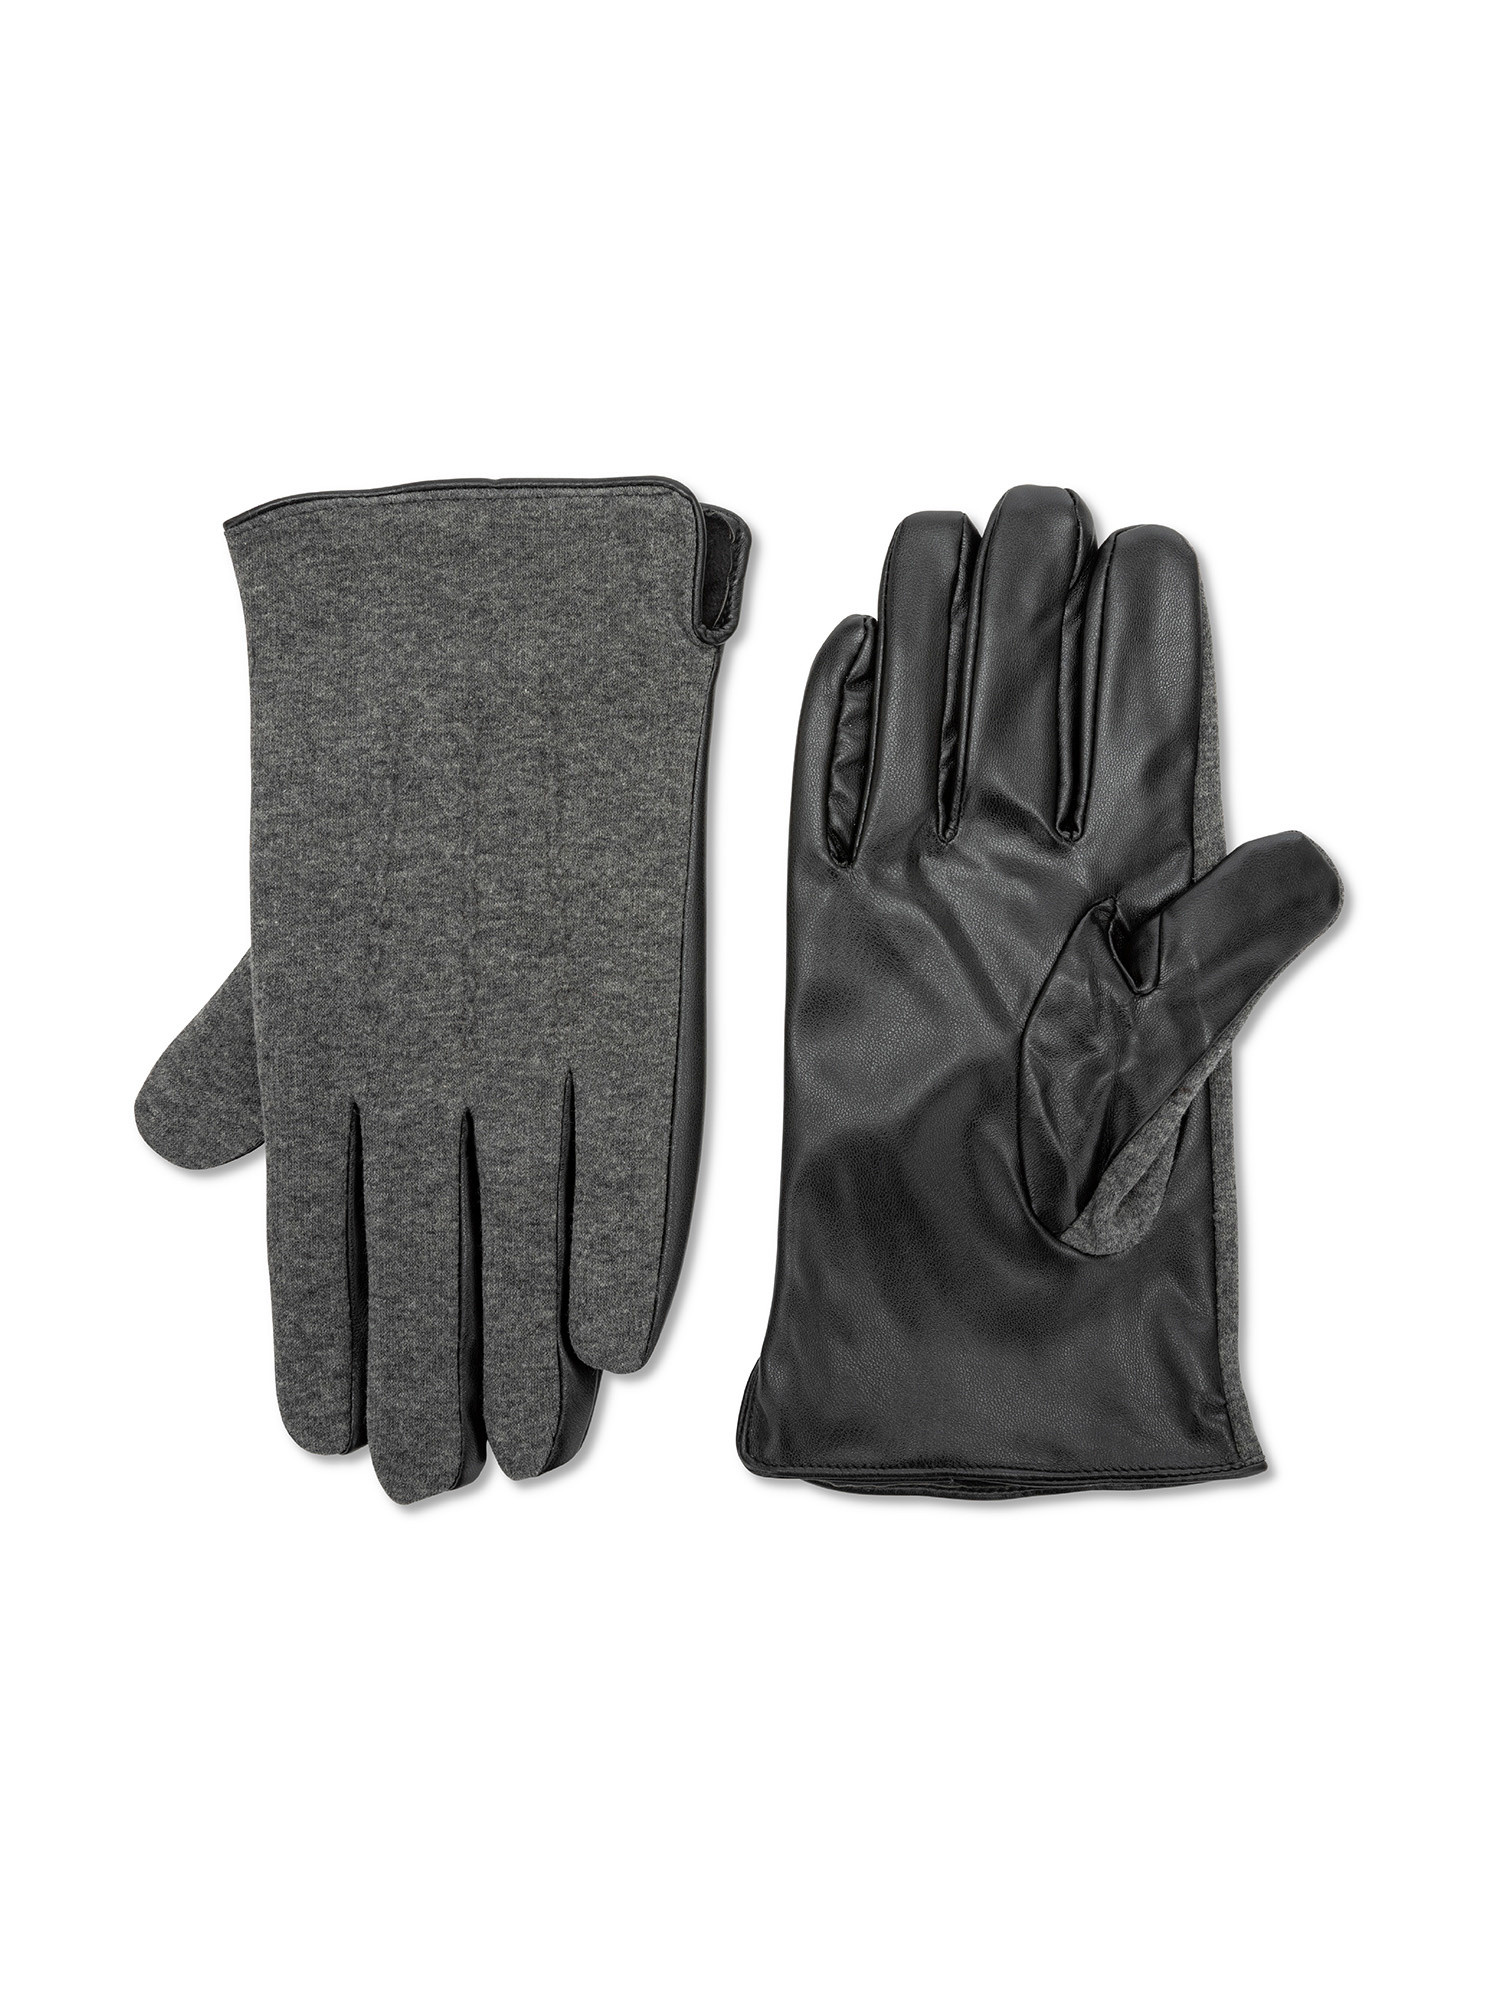 Luca D'Altieri - Gloves in jersey and eco-leather, Grey, large image number 0